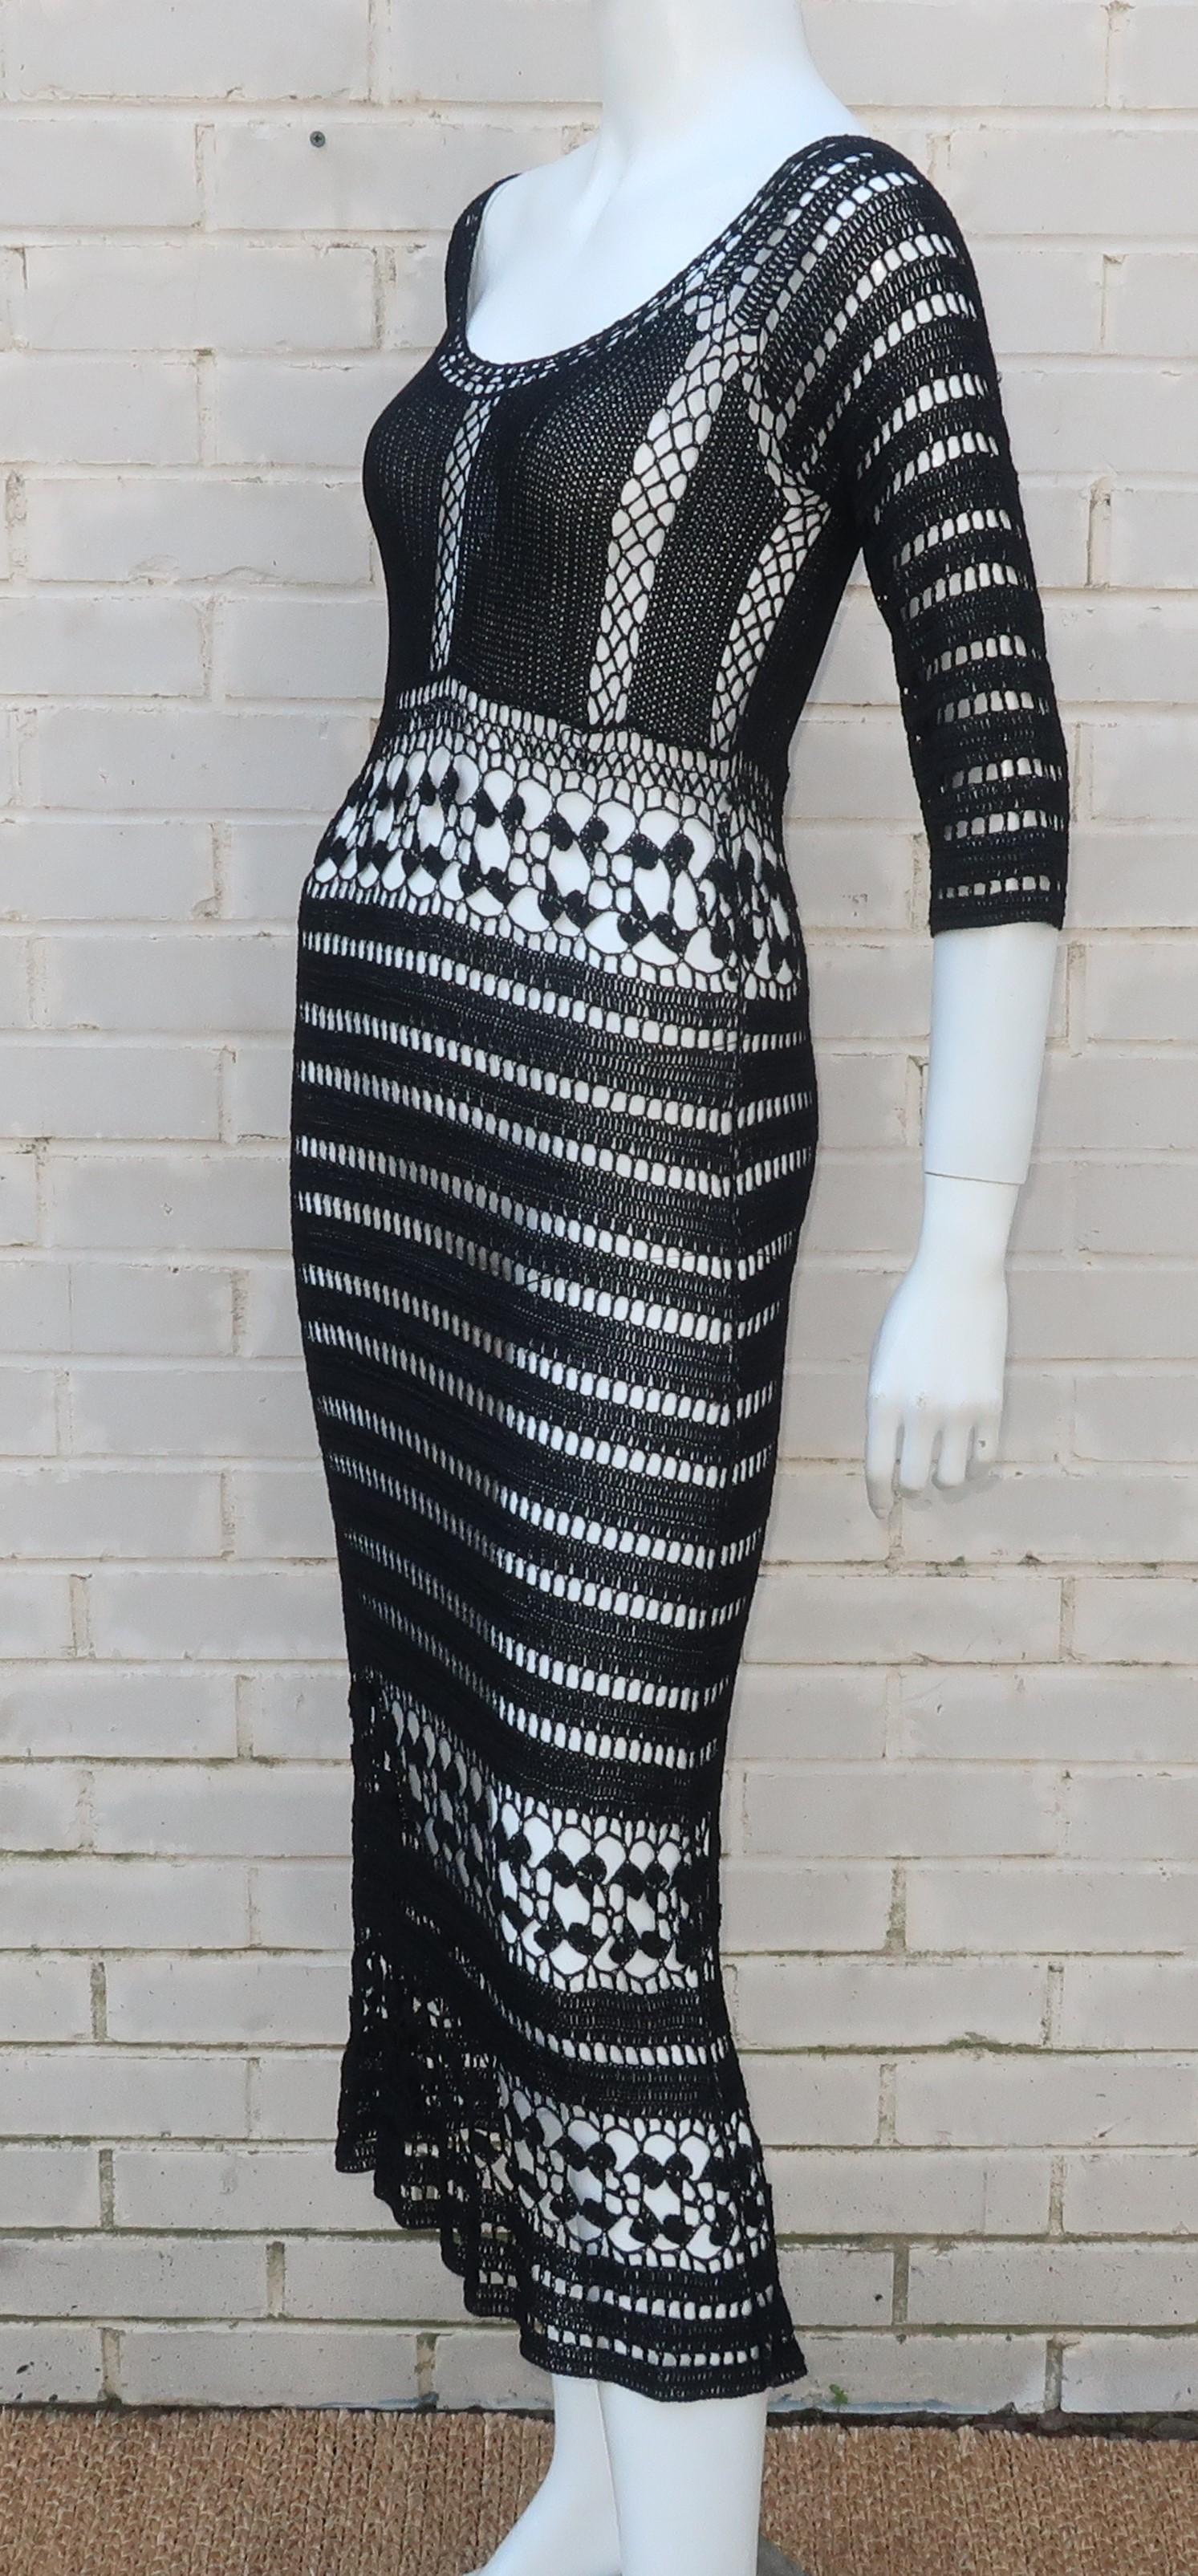 A 1990's black crochet dress designed by Allen Schwartz for his ABS label with a definitive nod to the bohemian looks of the early 1970's.  The pullover dress drapes the body beautifully with an intricate design in heavy cording that scoops at the